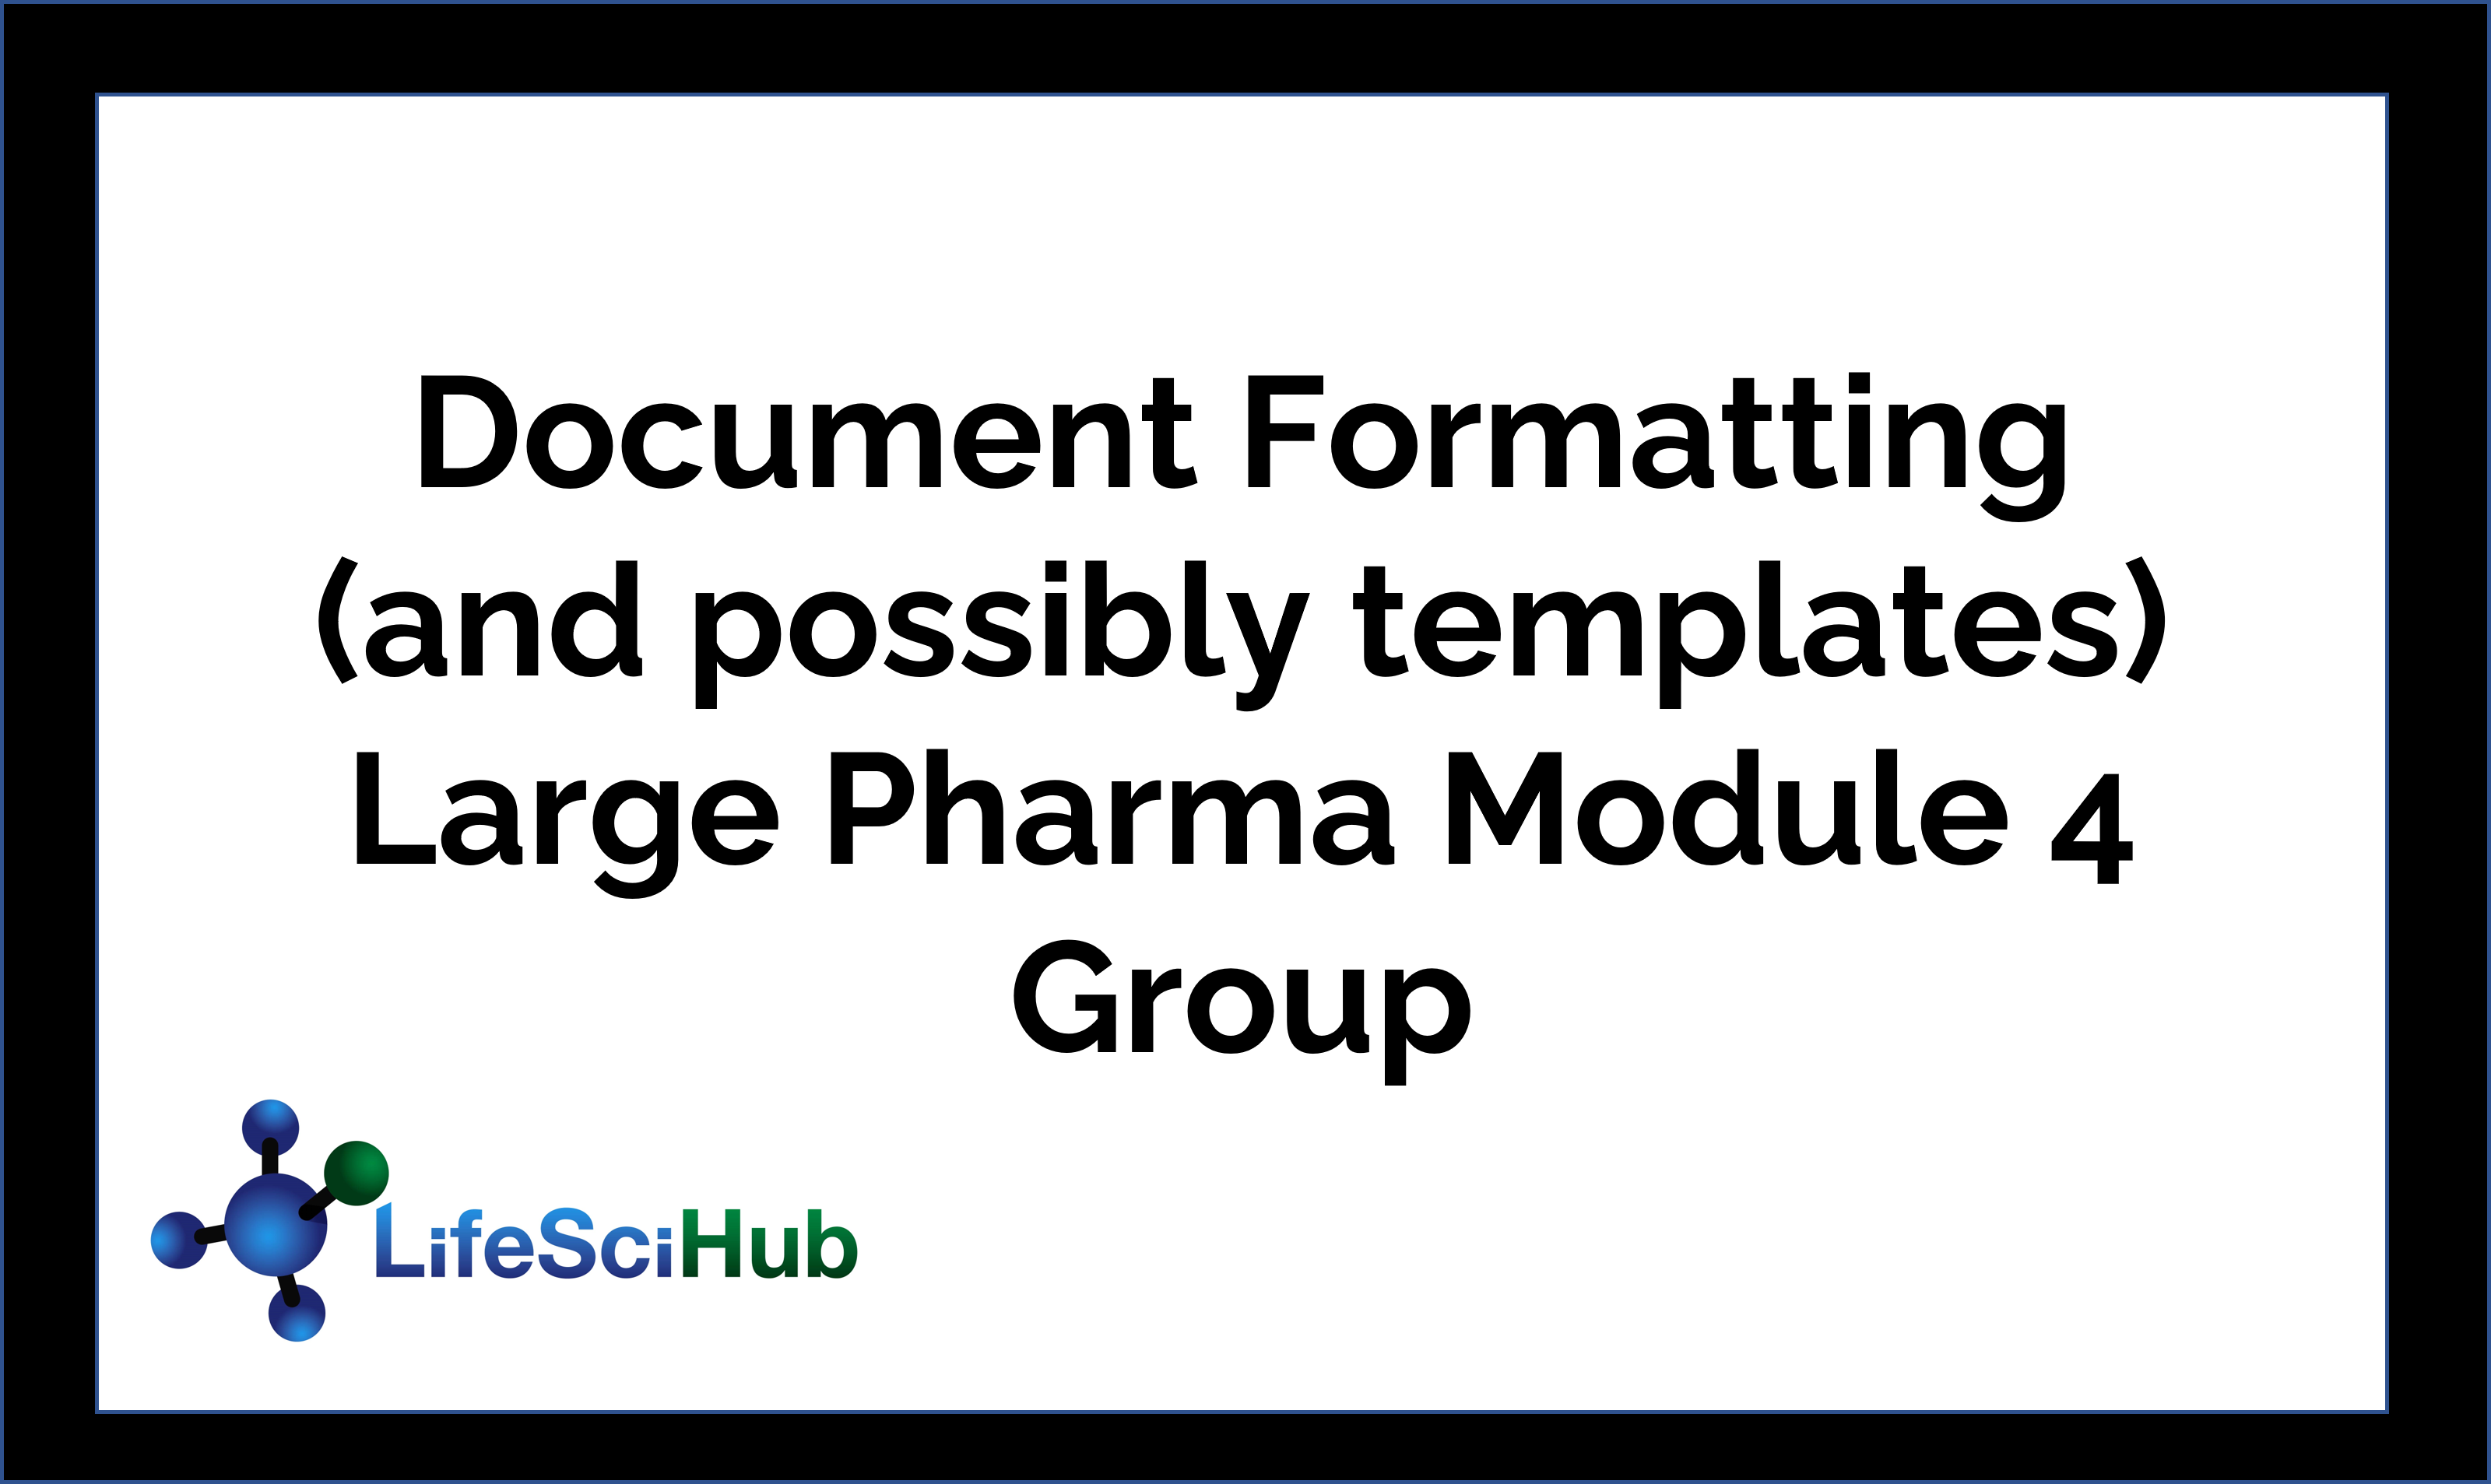 Document Formatting (and possibly templates) Expertise Needed- Large Pharma Module 4 Group